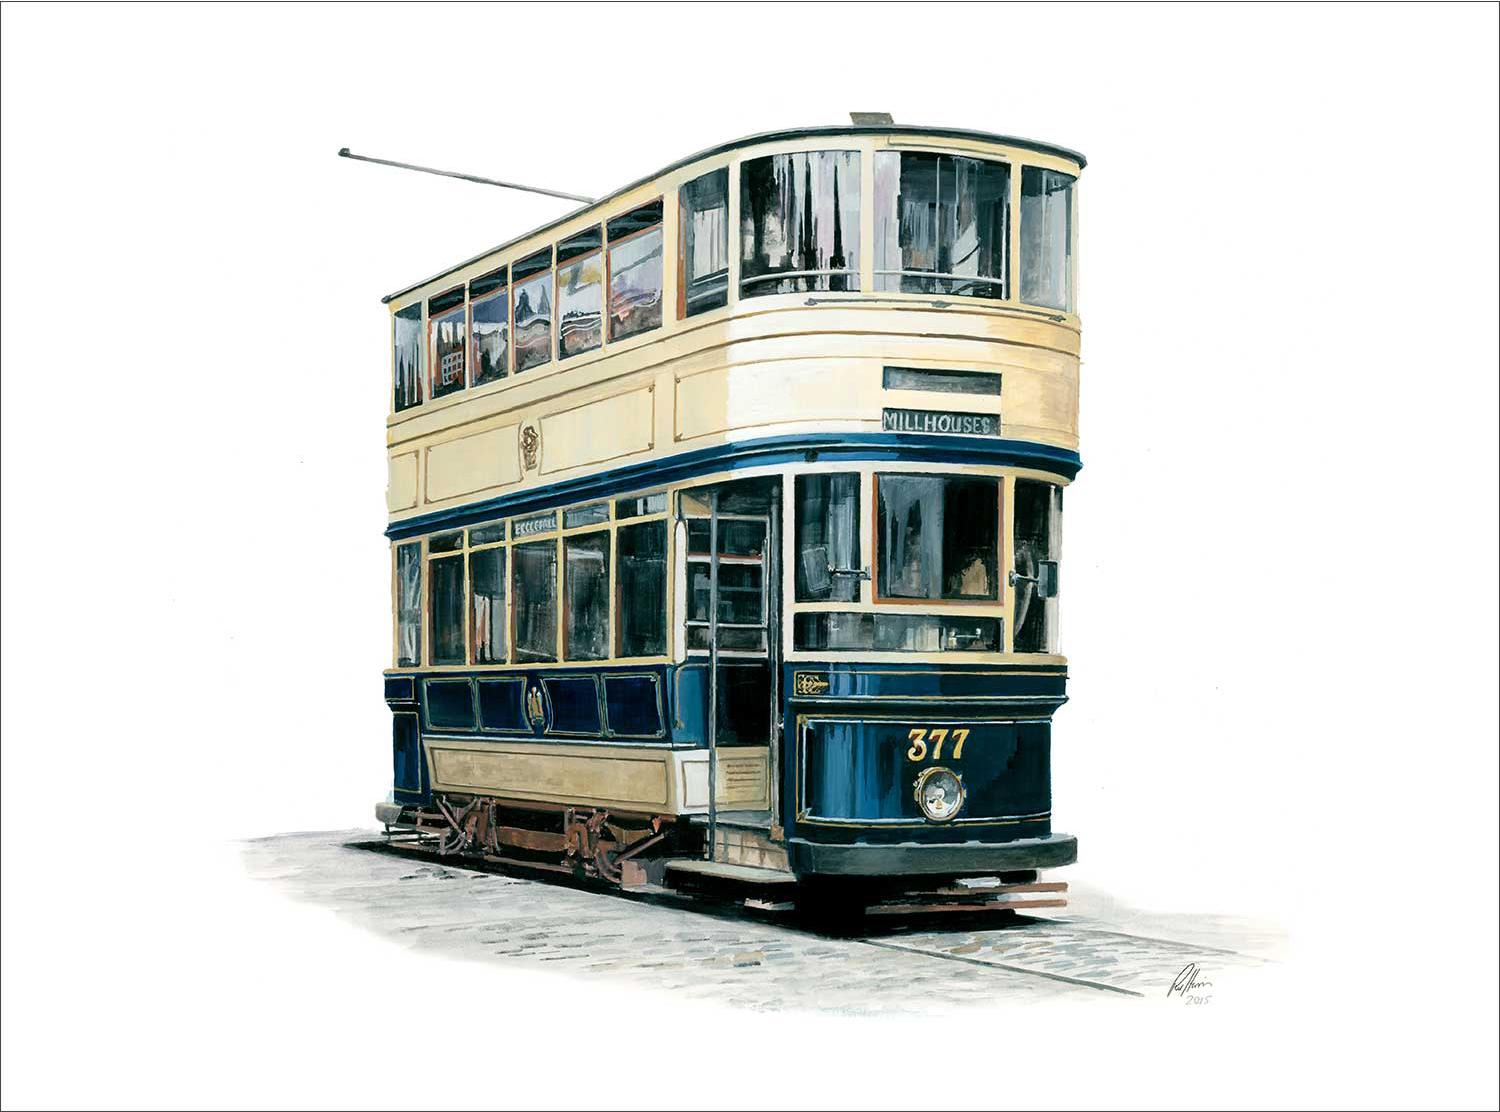 Sheffield Corporation Tramways “Rocker Panel” Car No 377. Built in 1919 by Brush at Loughborough Art Print from an original painted by artist Rod Harrison